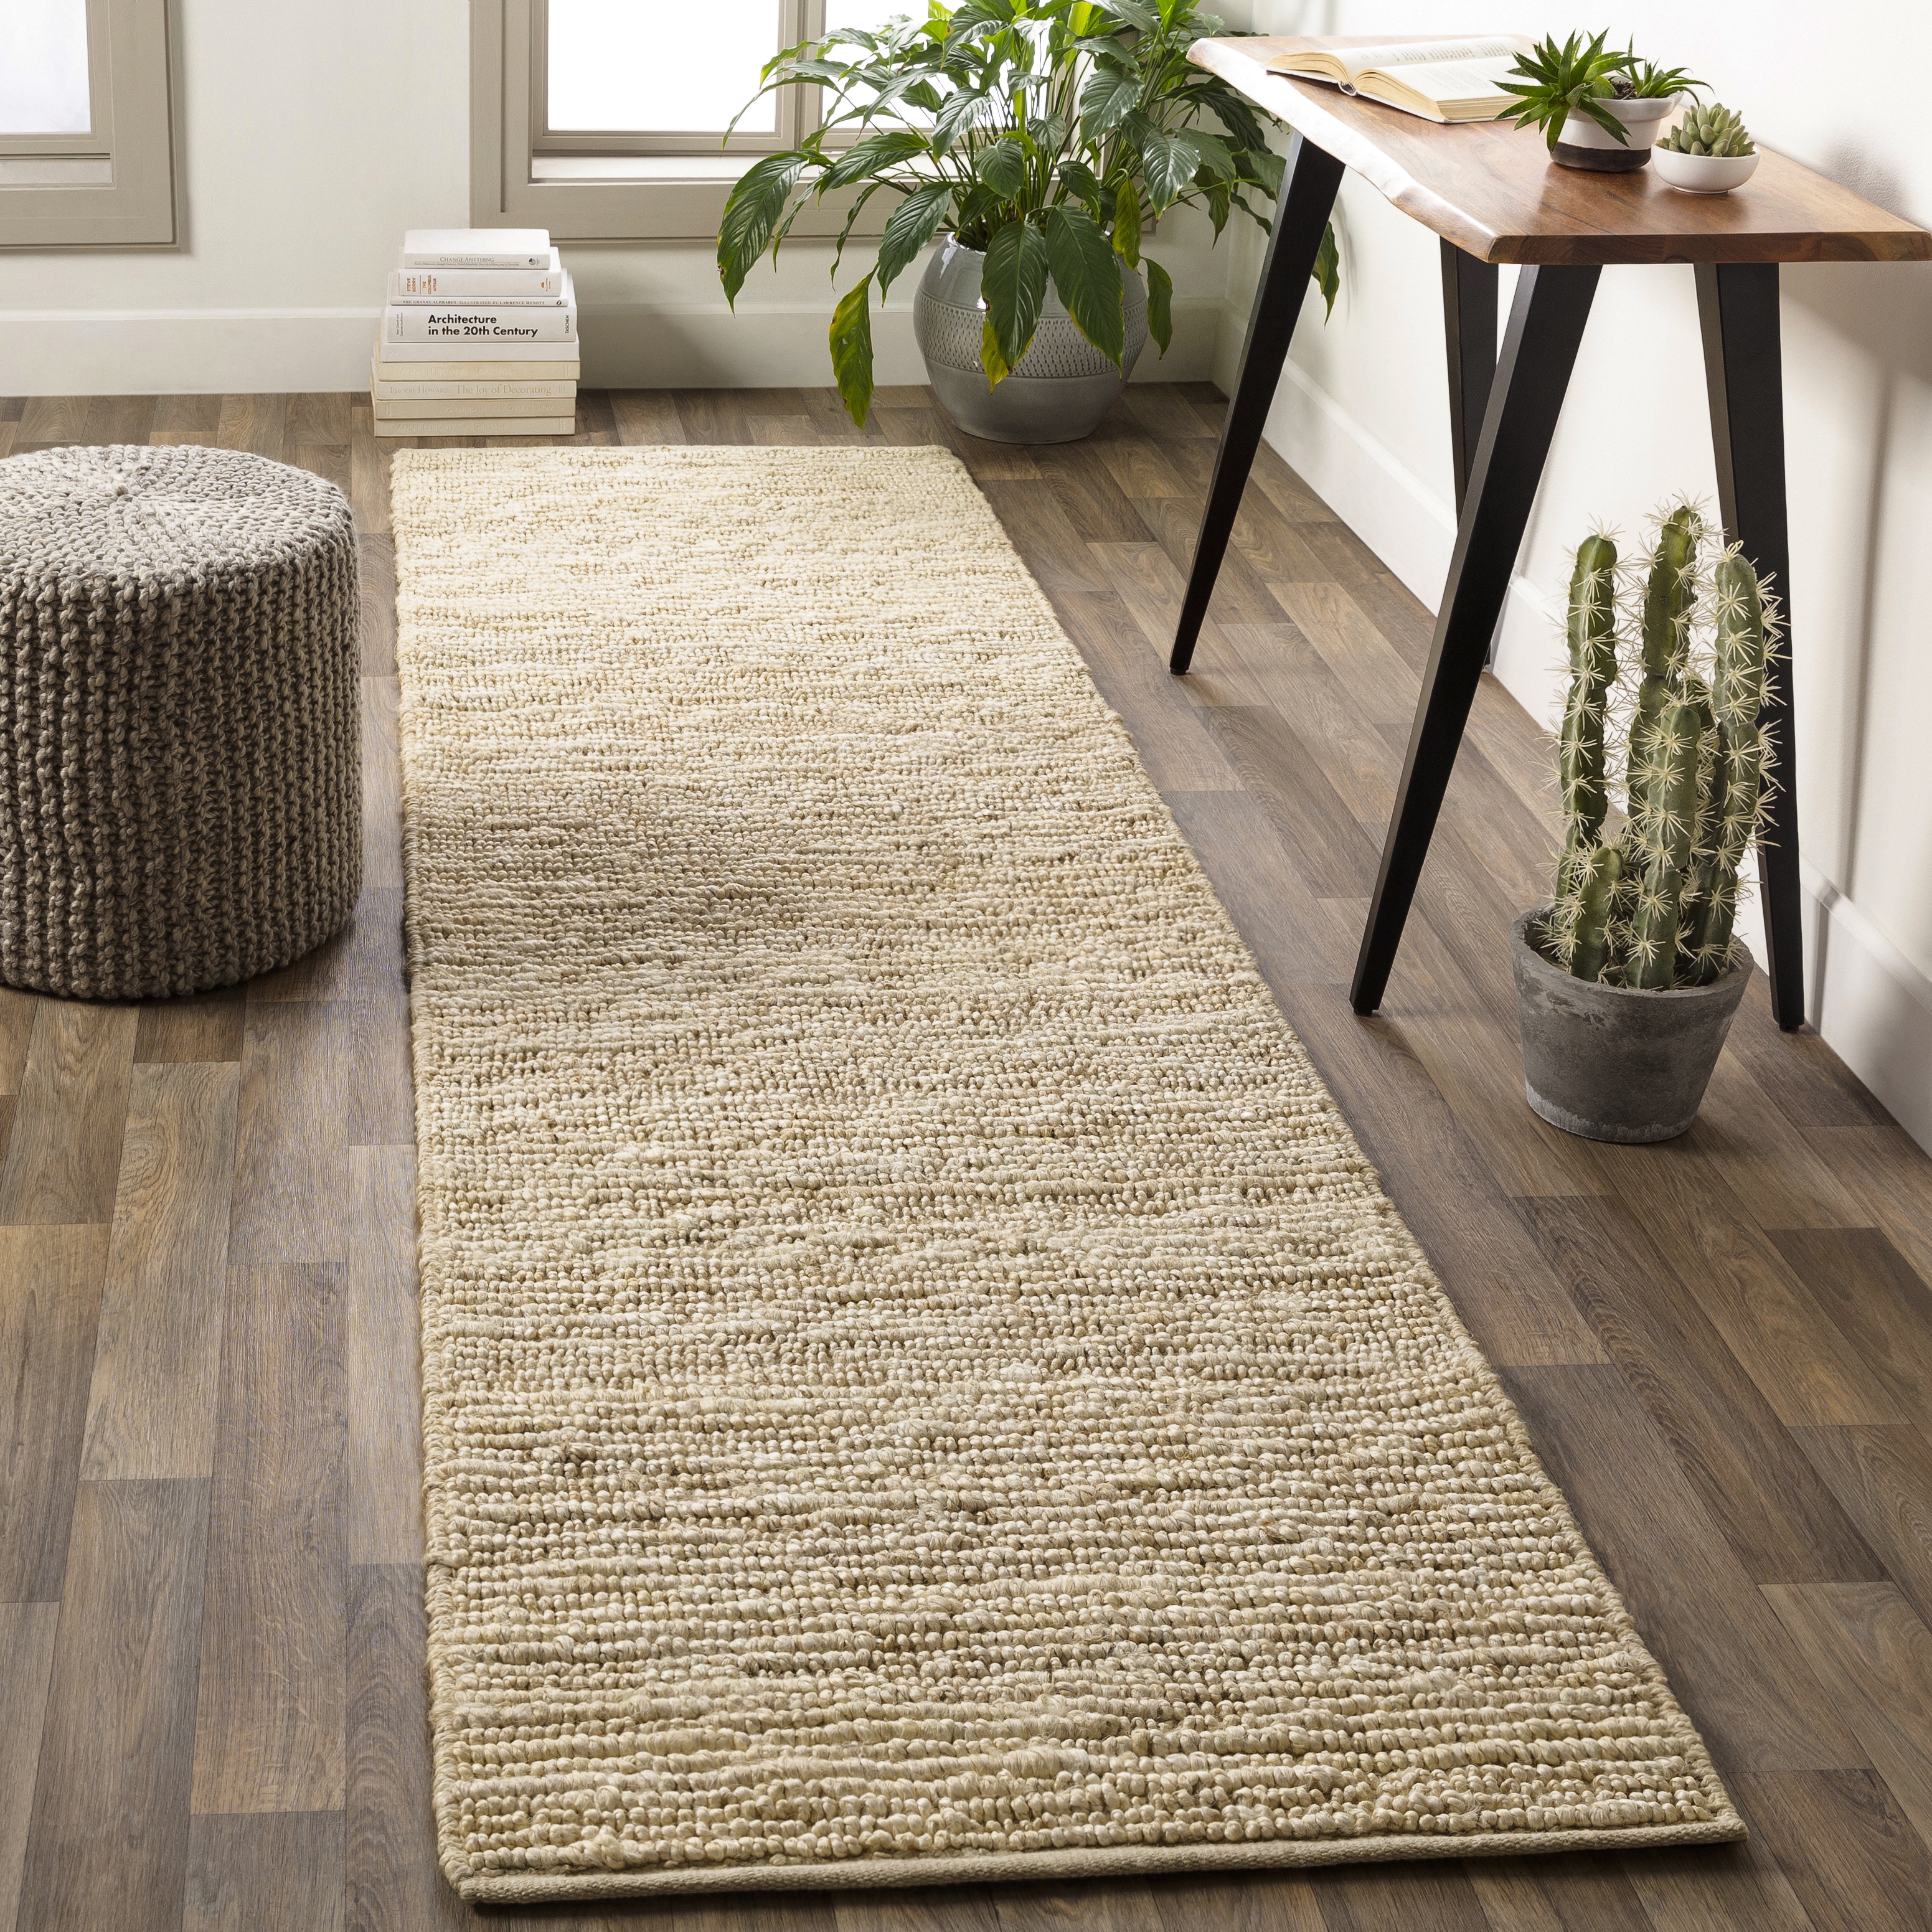 Continental Rug, 6' x 9' - Image 1